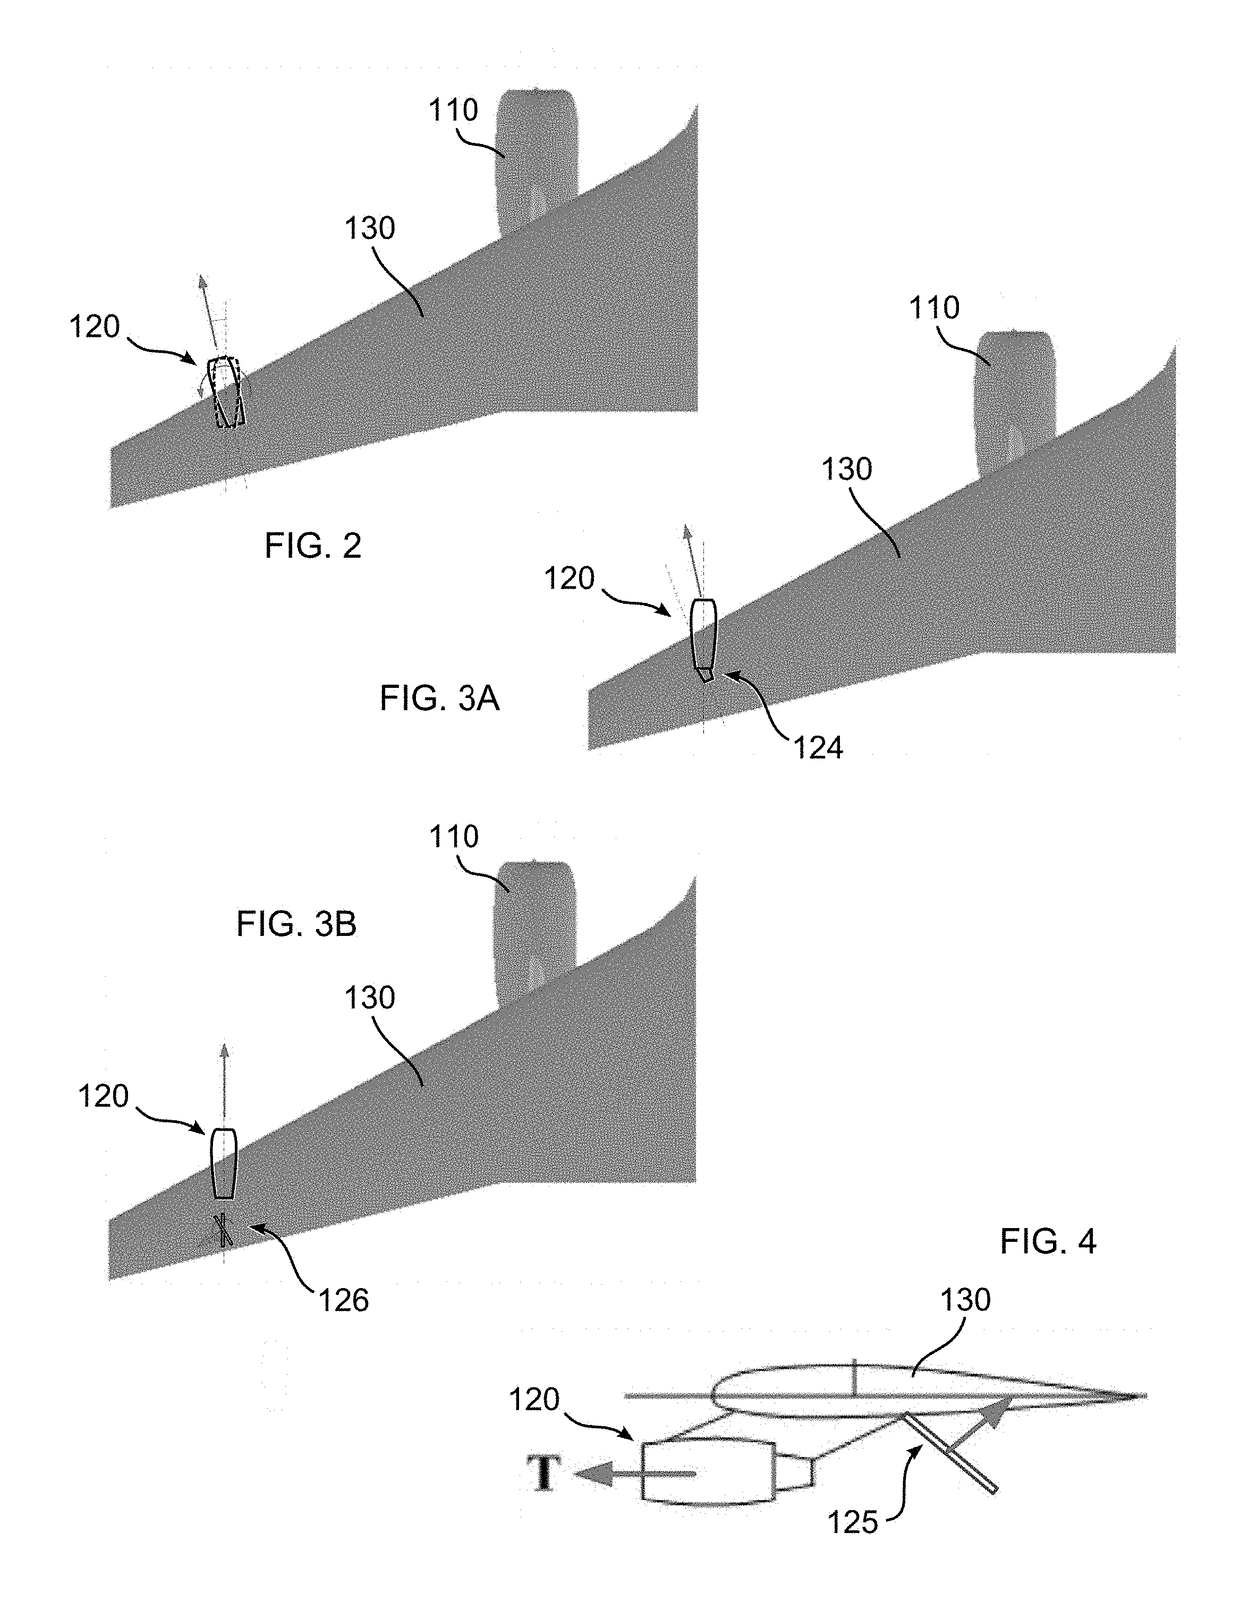 Aeroelastic wing shaping using distributed propulsion